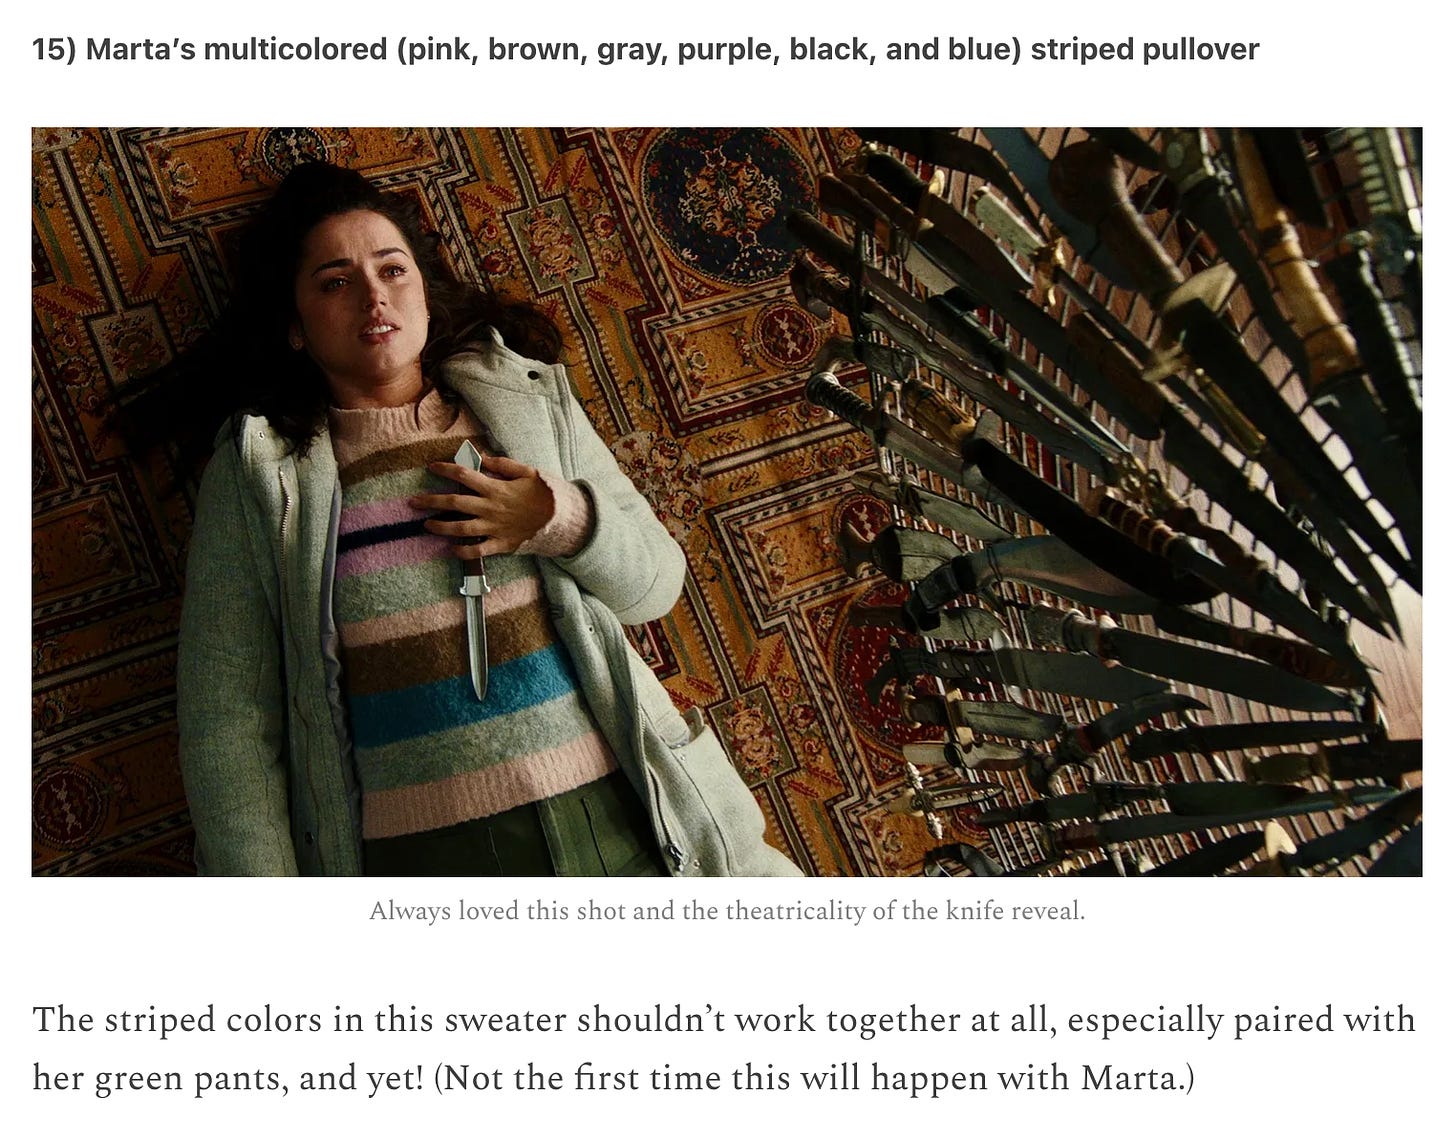 Screenshot from the Knit(ting) Flicks post that reads: “15) Marta’s multicolored (pink, brown, gray, purple, black, and blue) striped pullover. The striped colors in this sweater shouldn’t work together at all, especially paired with her green pants, and yet! (Not the first time this will happen with Marta.)” with a still from “Knives Out” of Marta lying on the floor holding a knife on her chest, which is clad in the truly inspired pullover described.